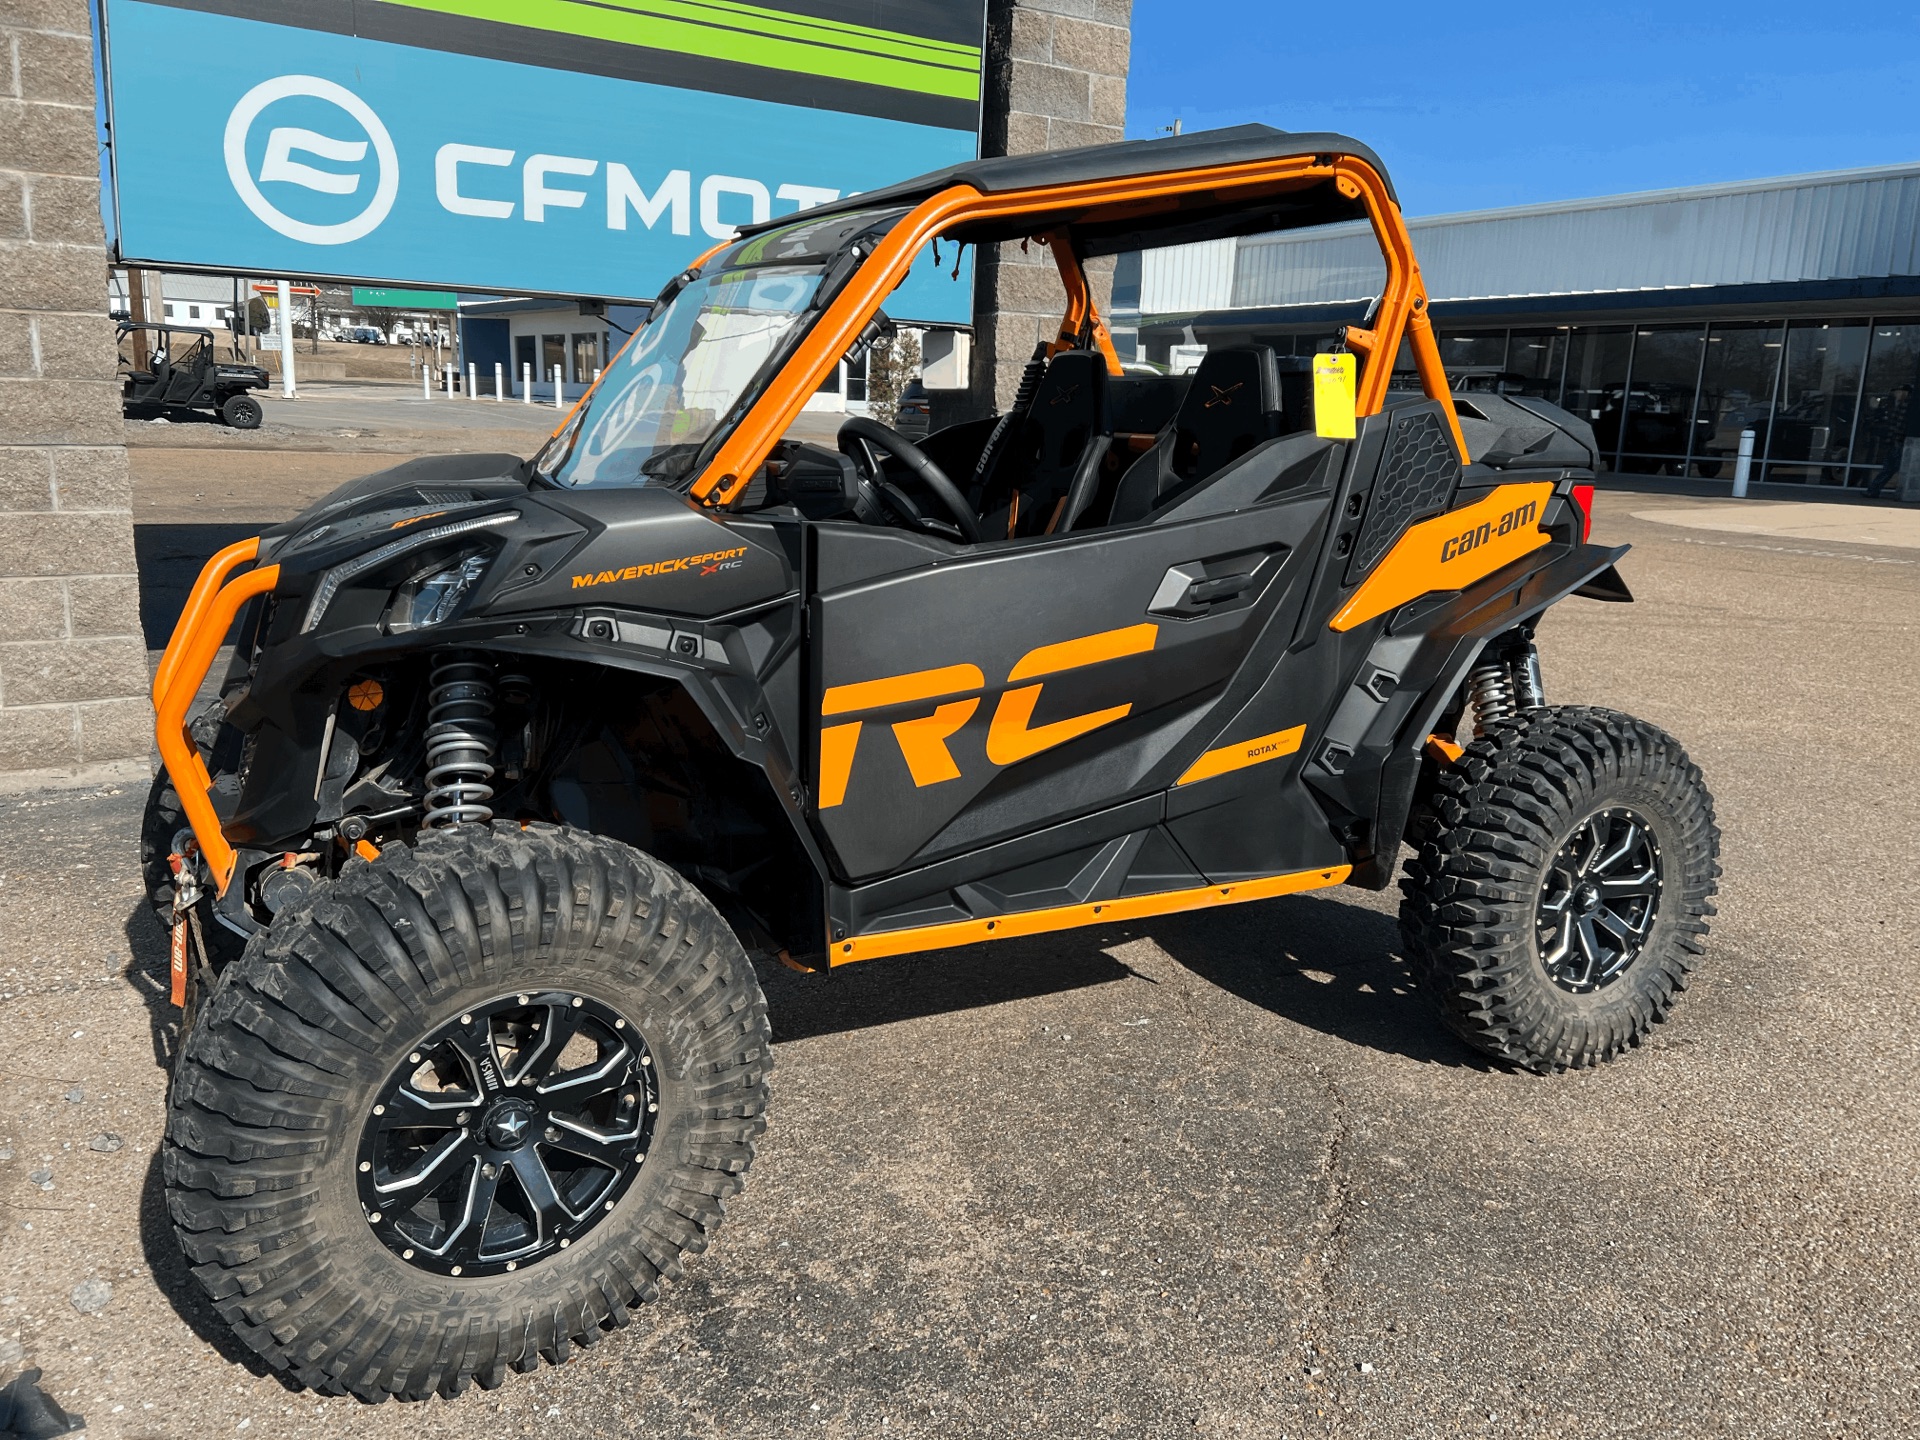 2020 Can-Am Maverick Sport X RC 1000R in Dyersburg, Tennessee - Photo 3